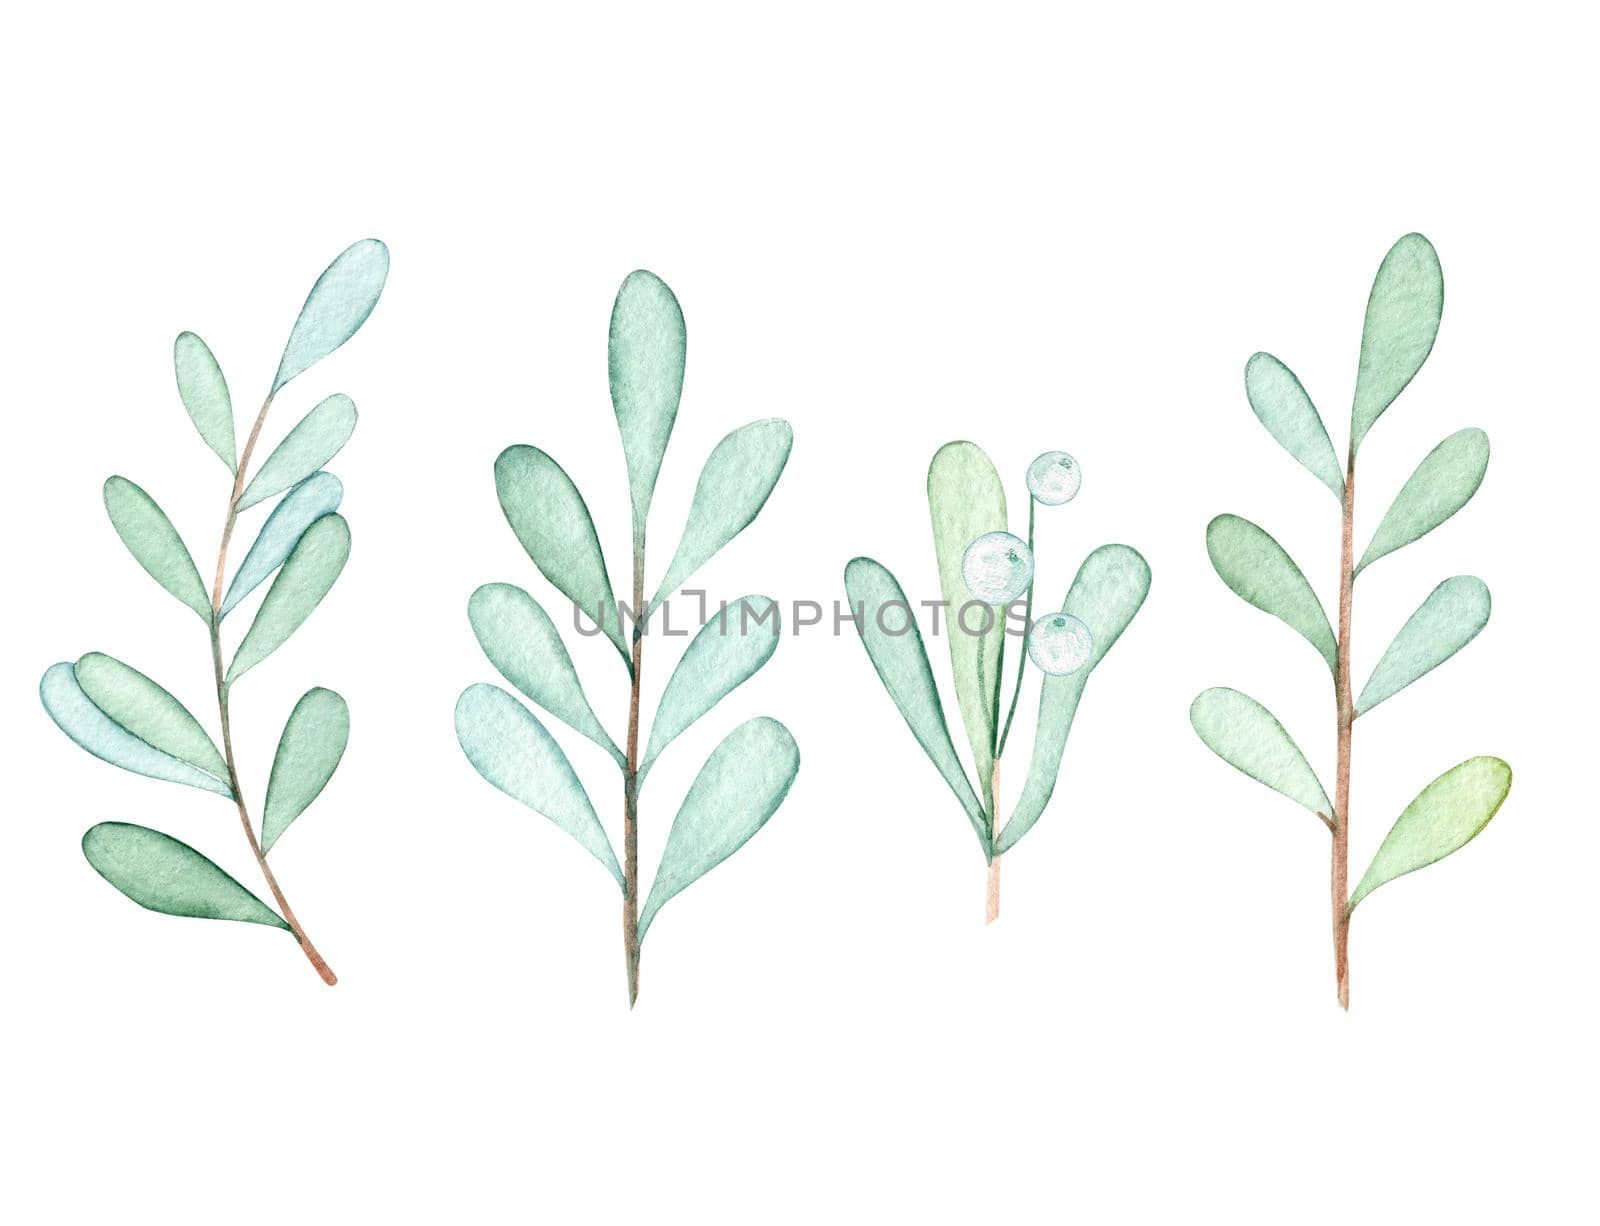 Watercolor mistletoe branches set isolated on white background. Winter greenery and white berries collection hand drawn illustrations